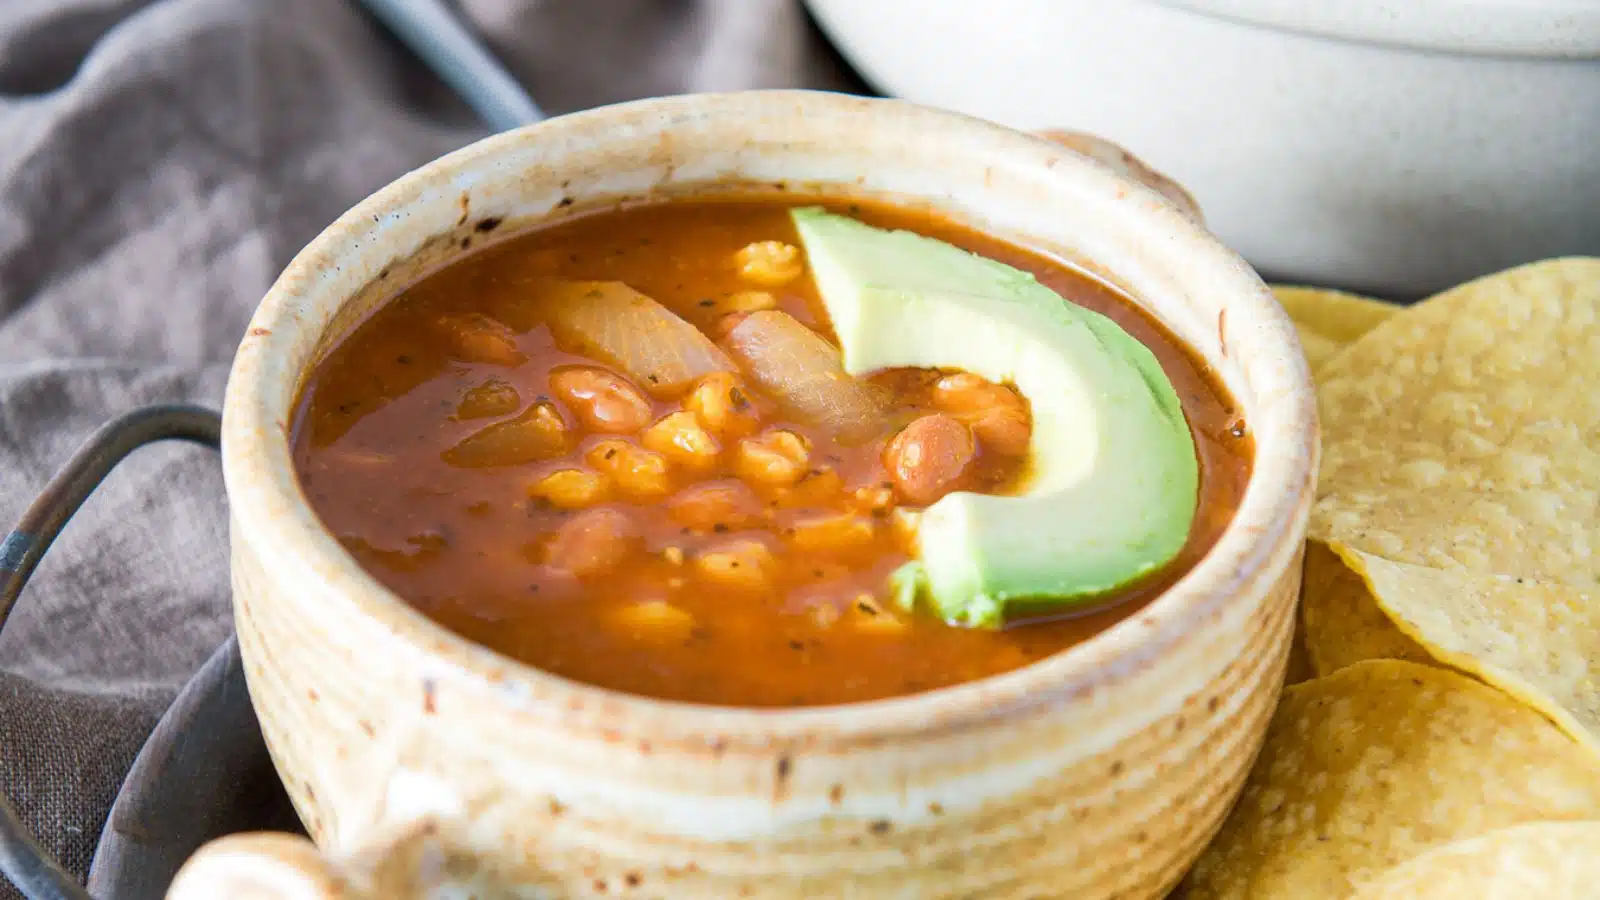 an avocado slice in on a tomato-based soup in a bowl with chips on the side